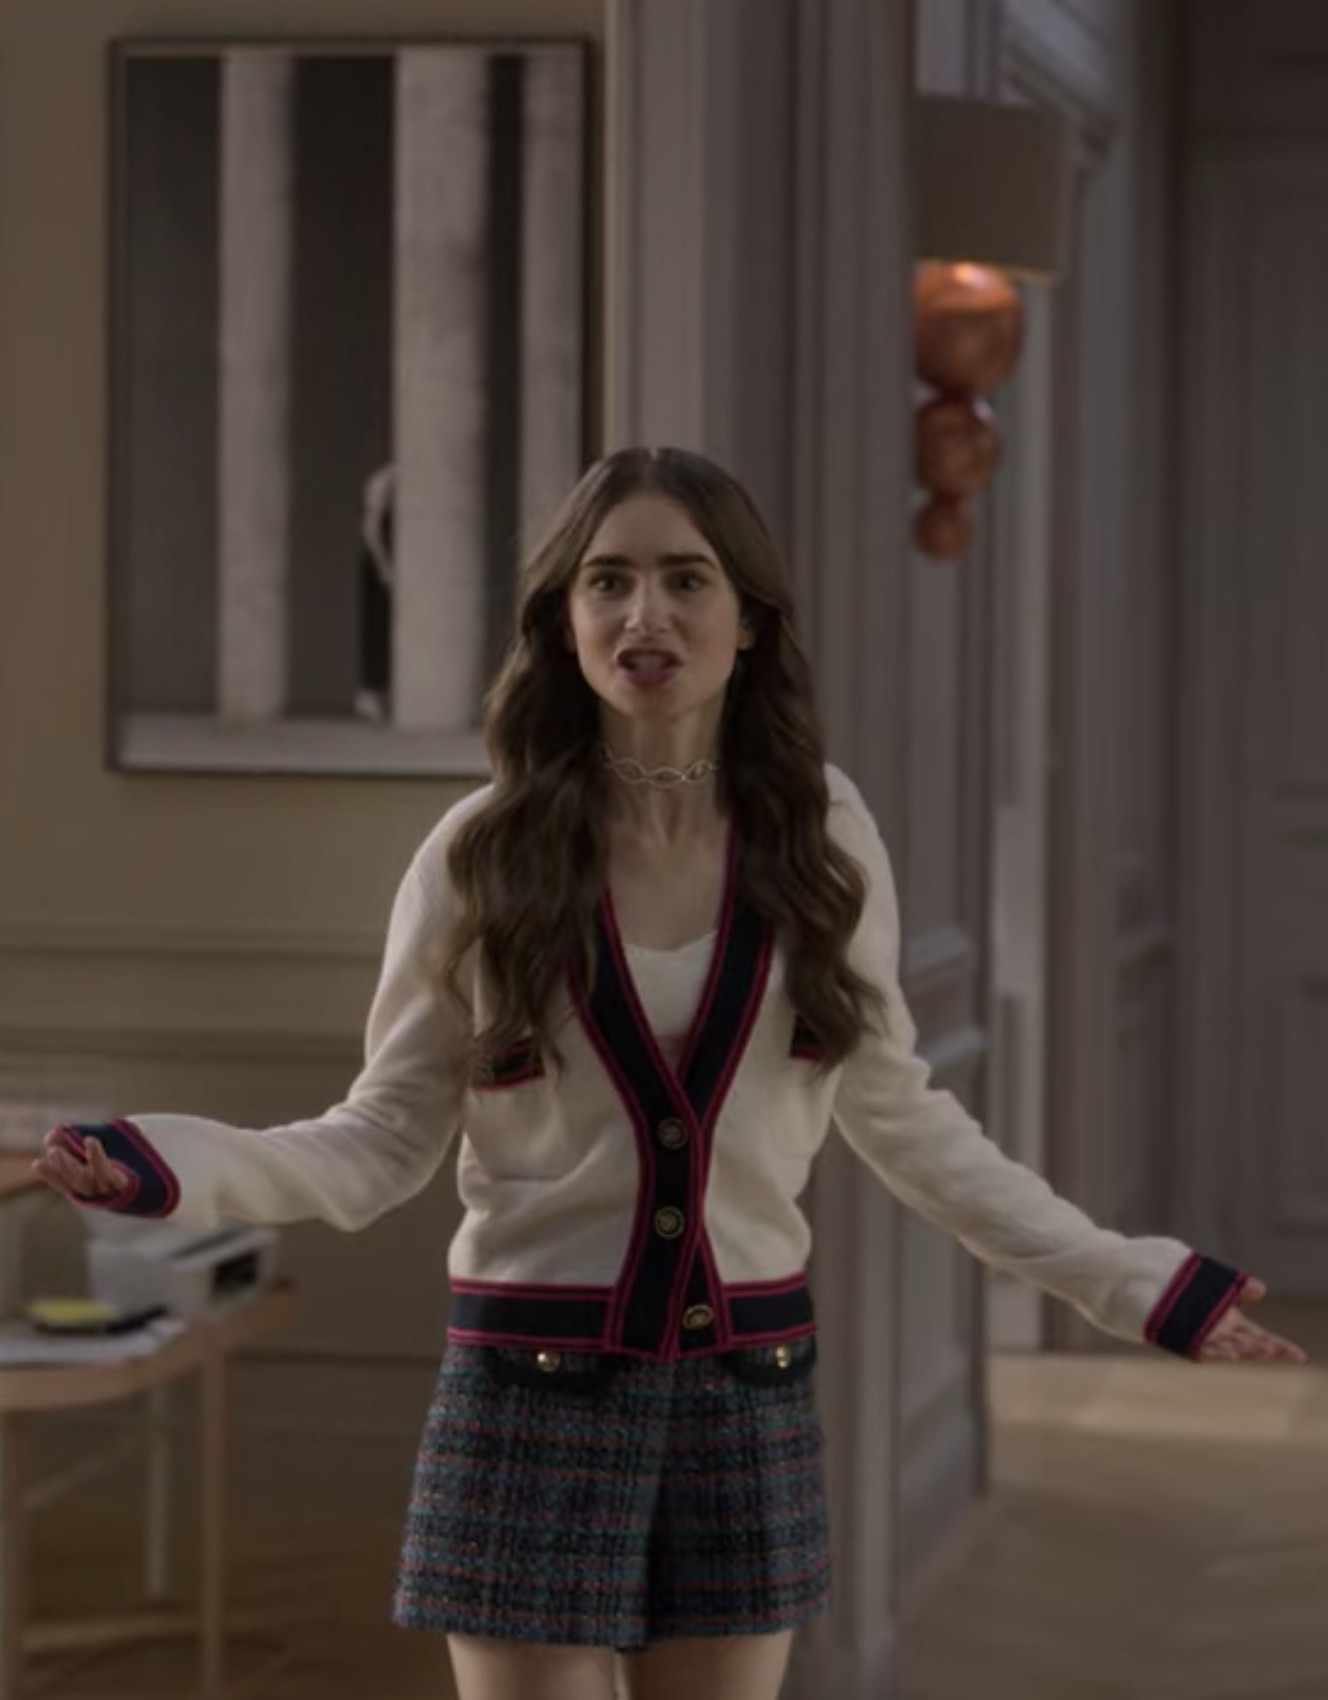 Emily gestures angrily while wearing an oversized red and cream cardigan and plaid shorts